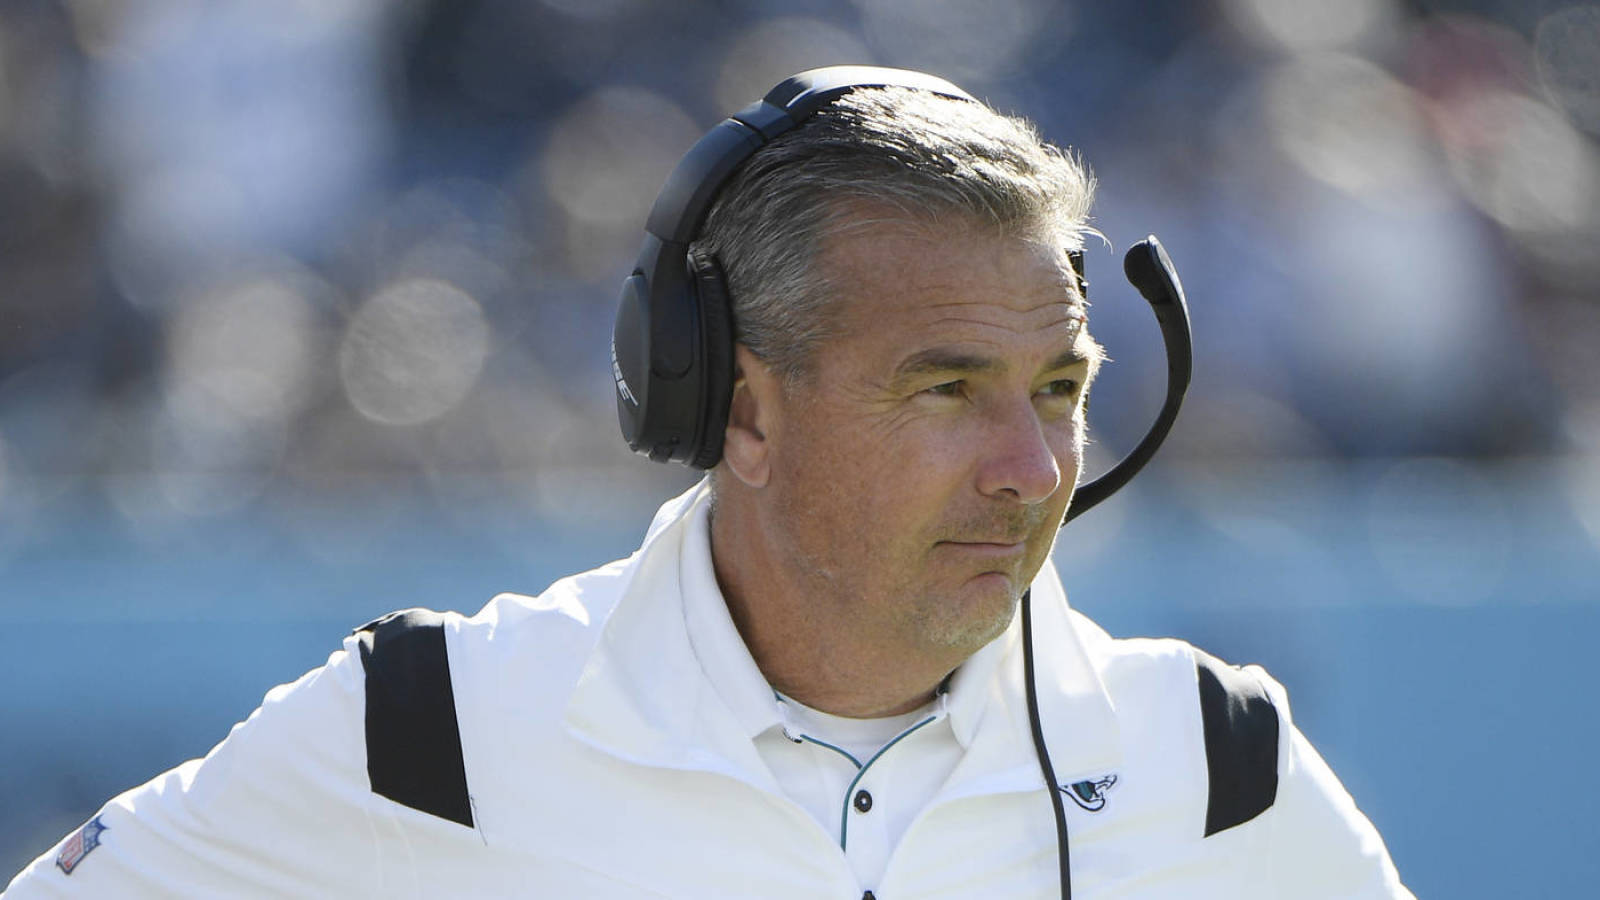 Could Urban Meyer be fired if Jags lose to Texans on Sunday?